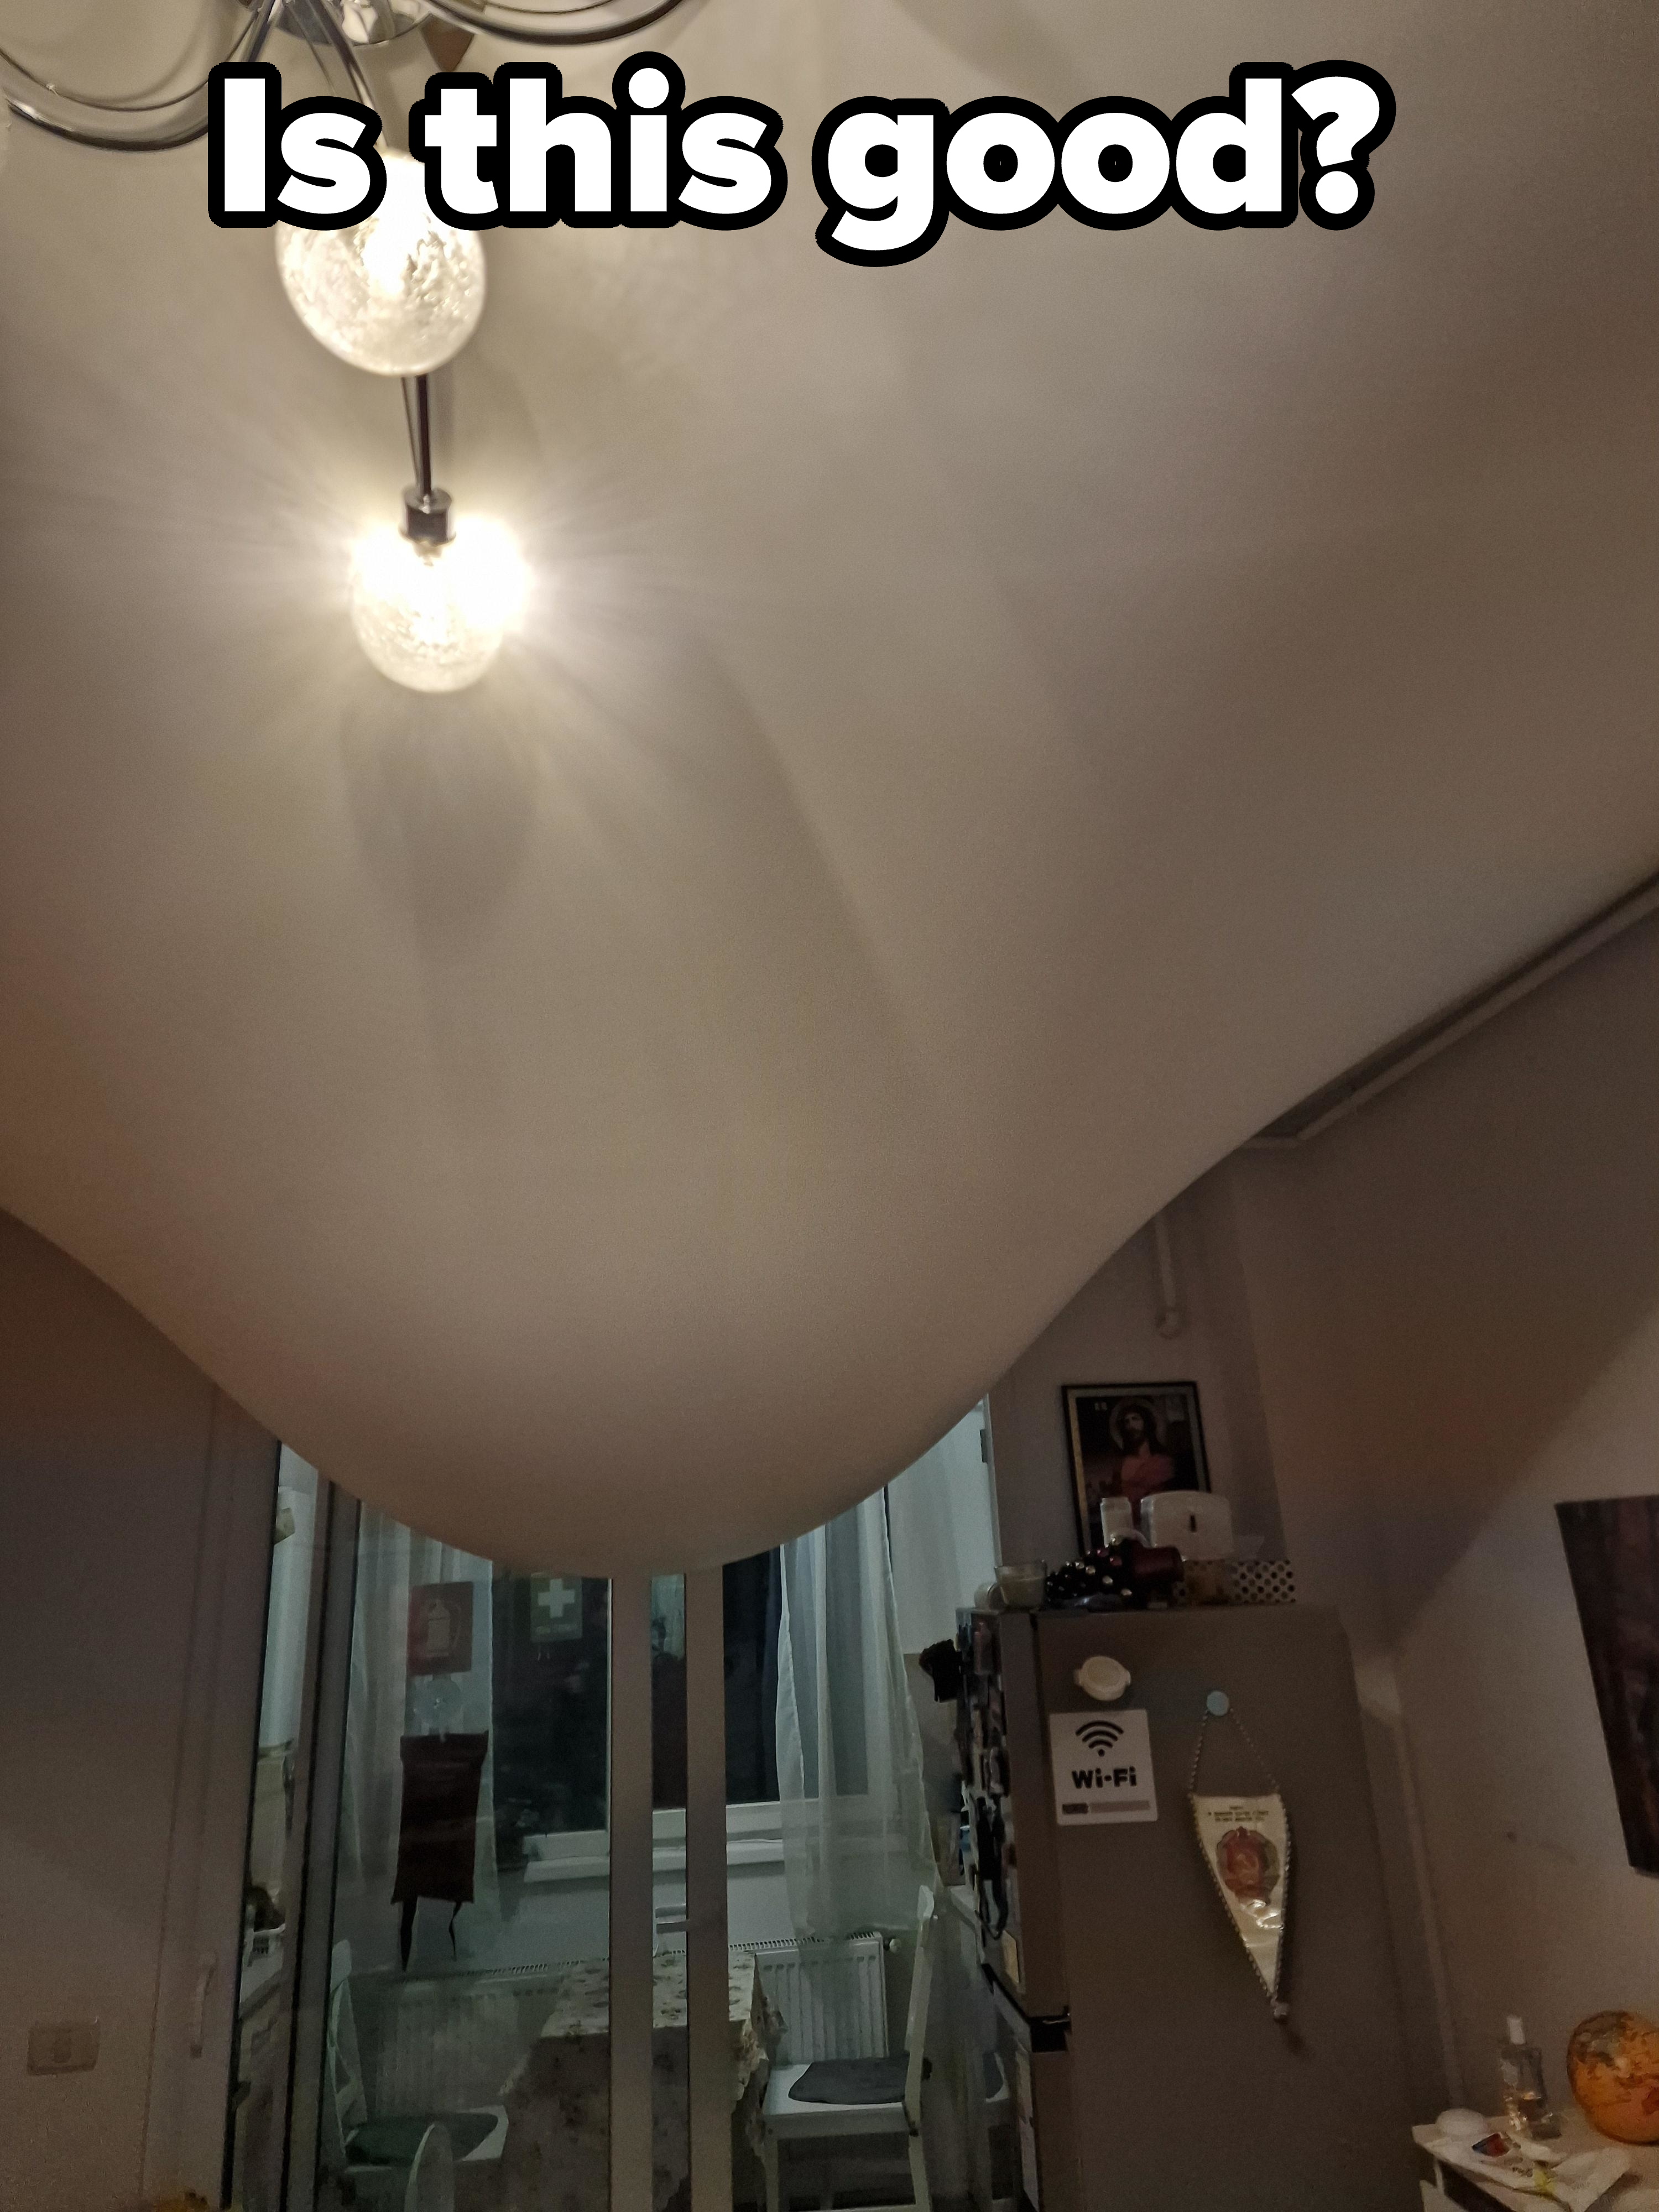 Ceiling light fixture on, illuminating a room with visible door at the end and a severely sagging ceiling